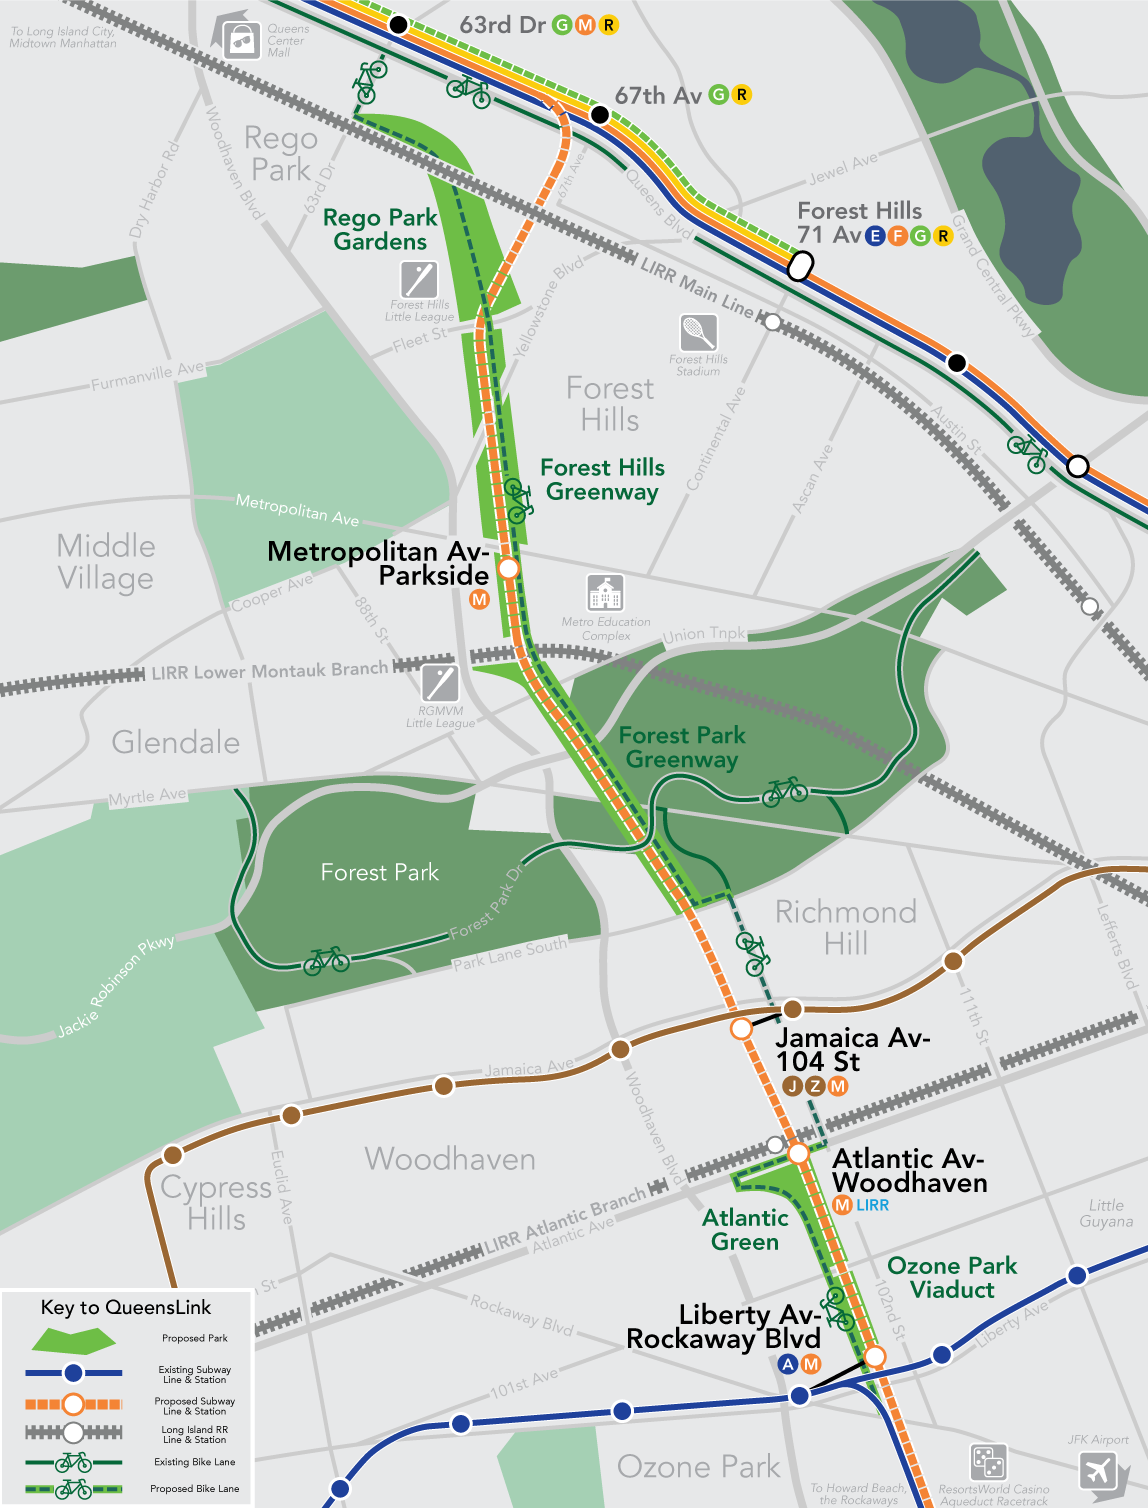 Map of the QueensLink right-of-way between Queens Blvd and Ozone Park.